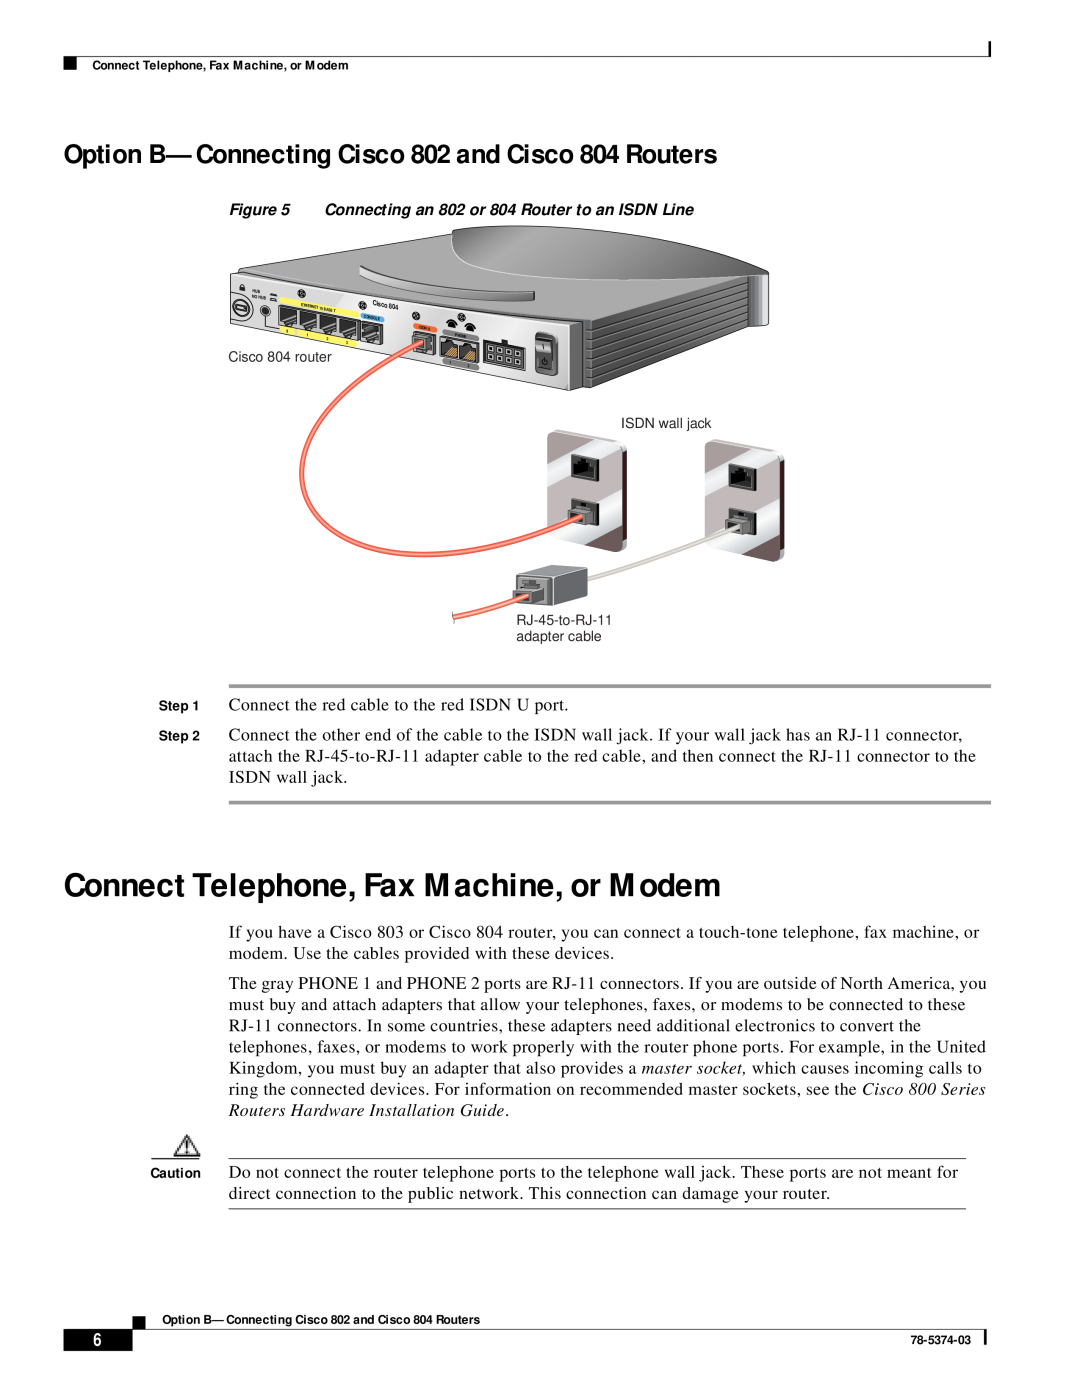 Cisco Systems 2800 Series Connect Telephone, Fax Machine, or Modem, Option B-Connecting Cisco 802 and Cisco 804 Routers 